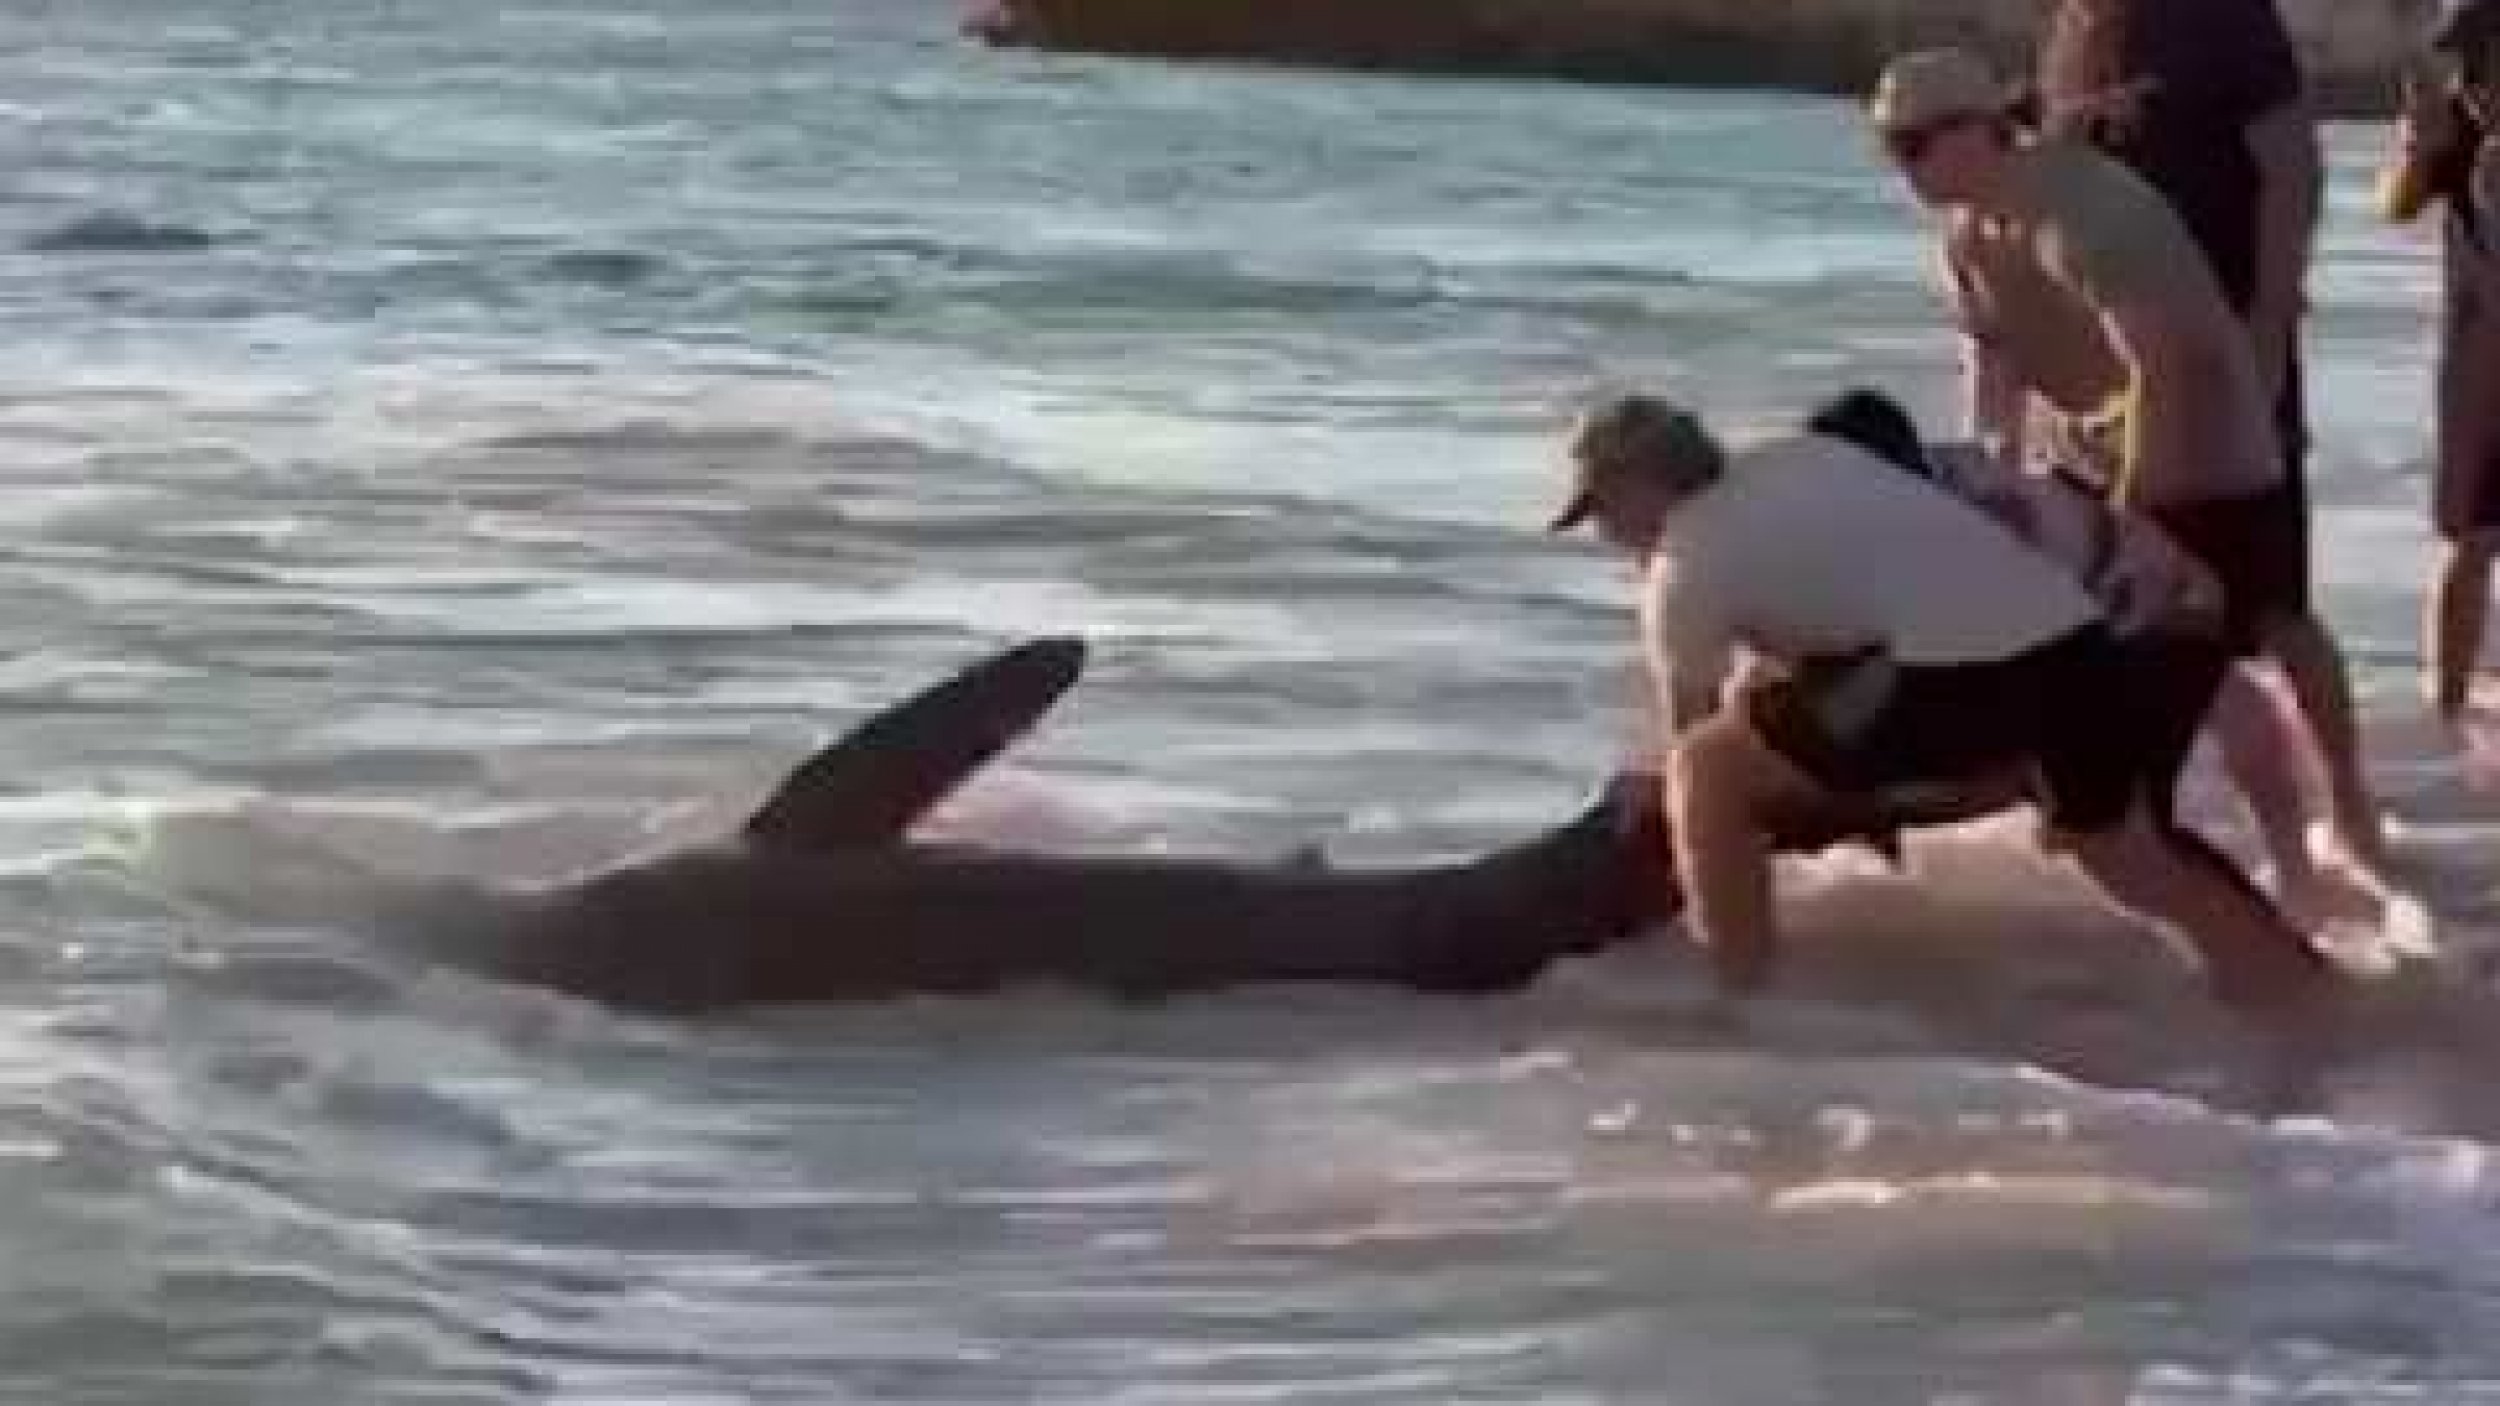 Stranded Shark Pushed To Sea By Beachgoers In Heart-Stopping Video